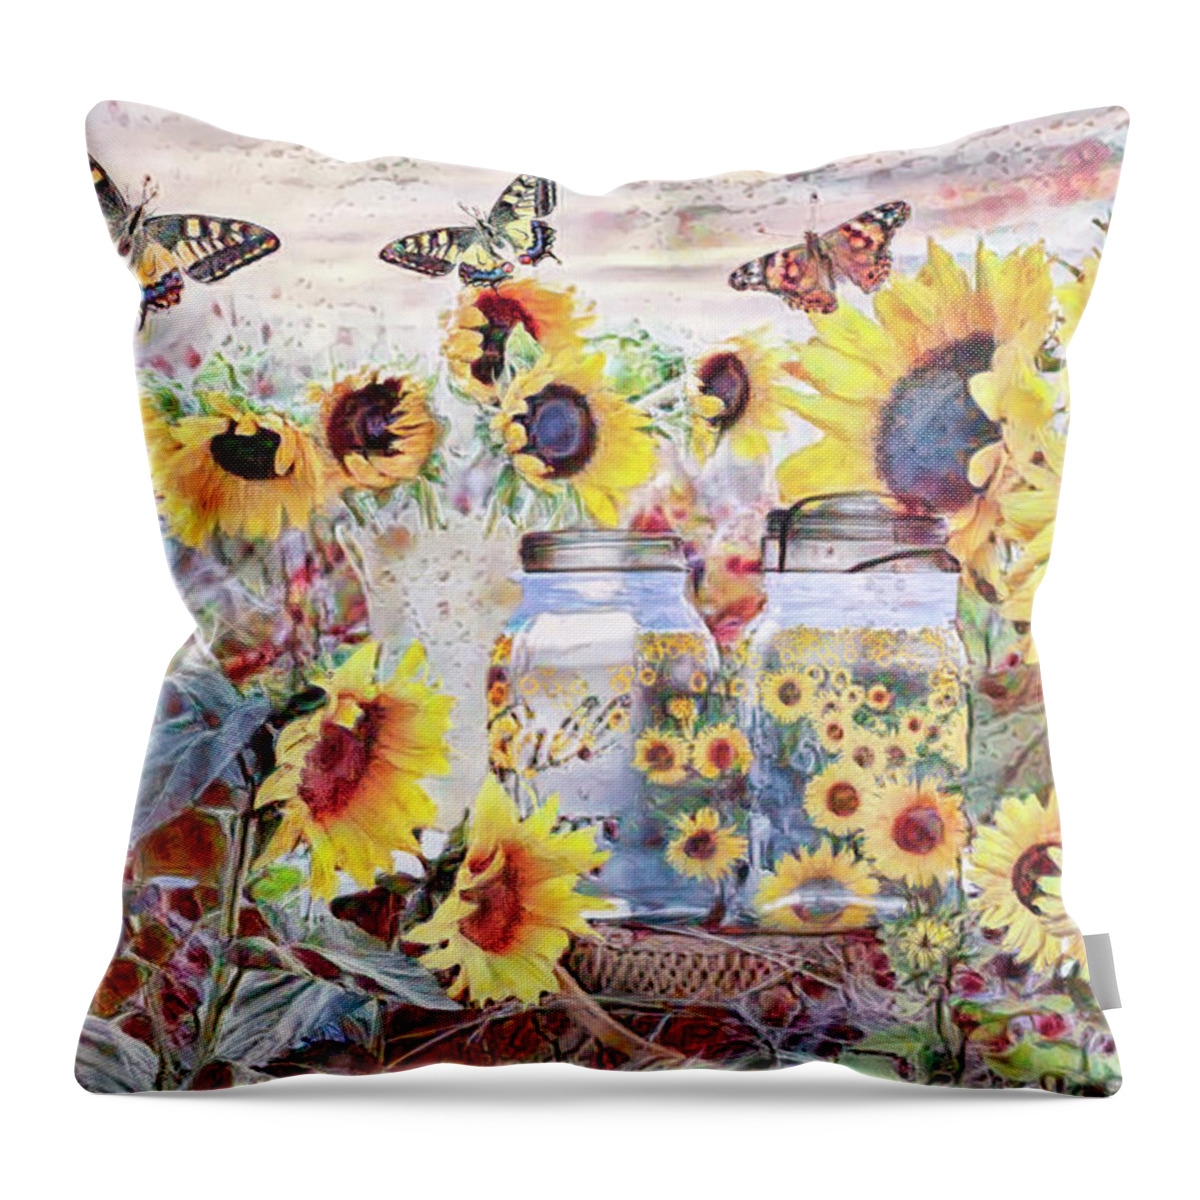 Spring Throw Pillow featuring the digital art Whimsical Sunshine in a Jar by Debra and Dave Vanderlaan